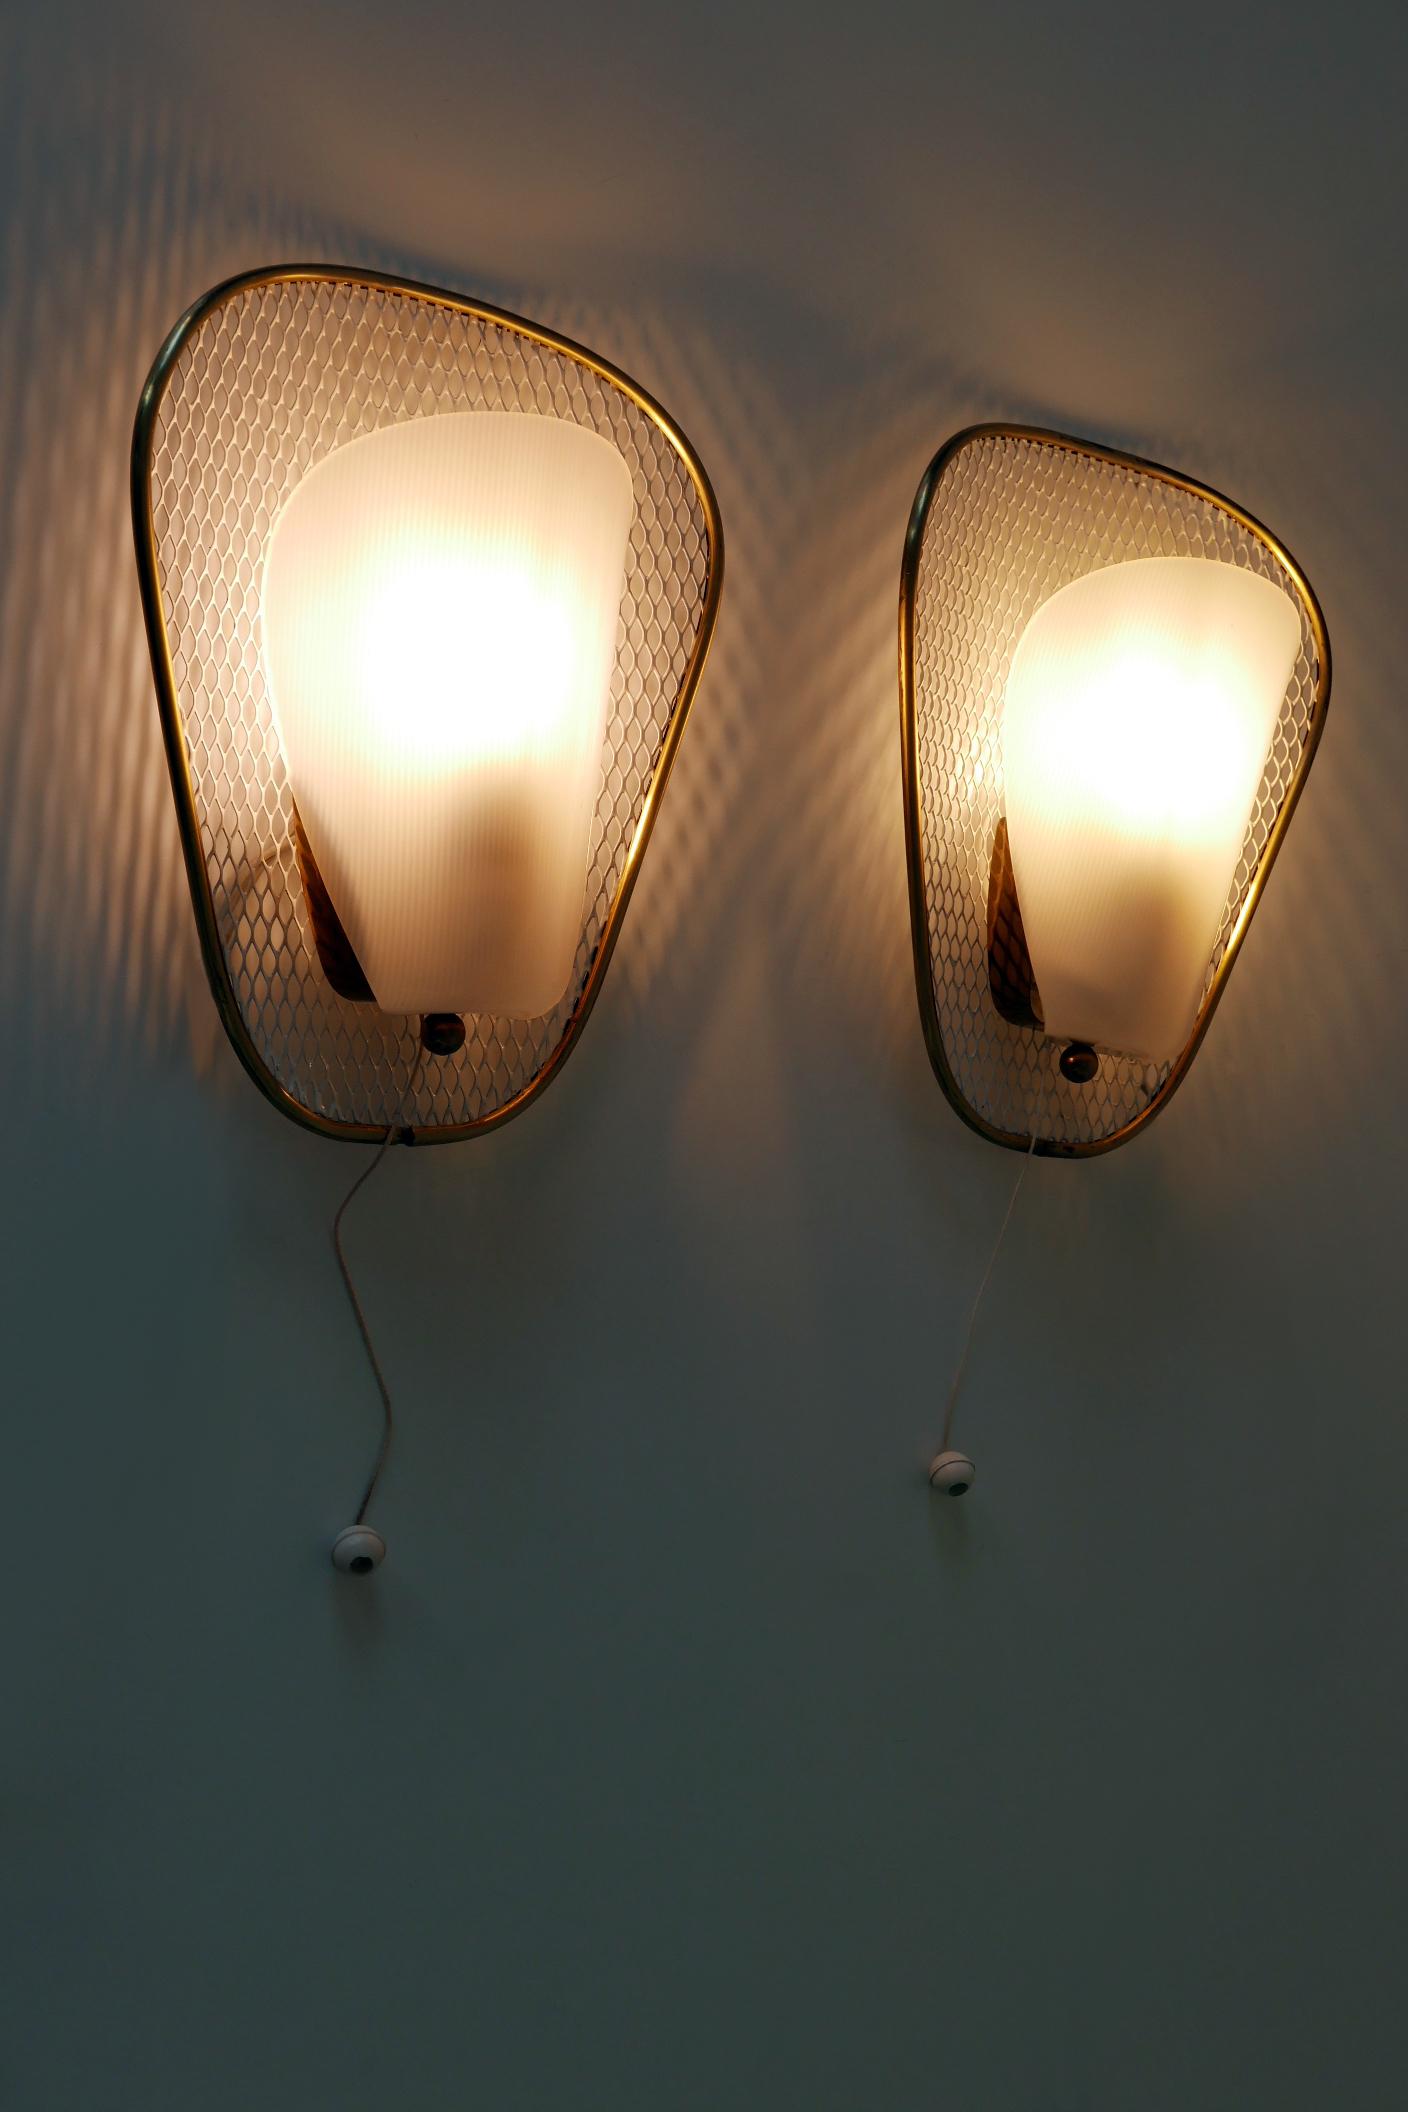 Set of Two Rare & Elegant Mid-Century Modern Sconces or Wall Lamps Germany 1950s For Sale 8